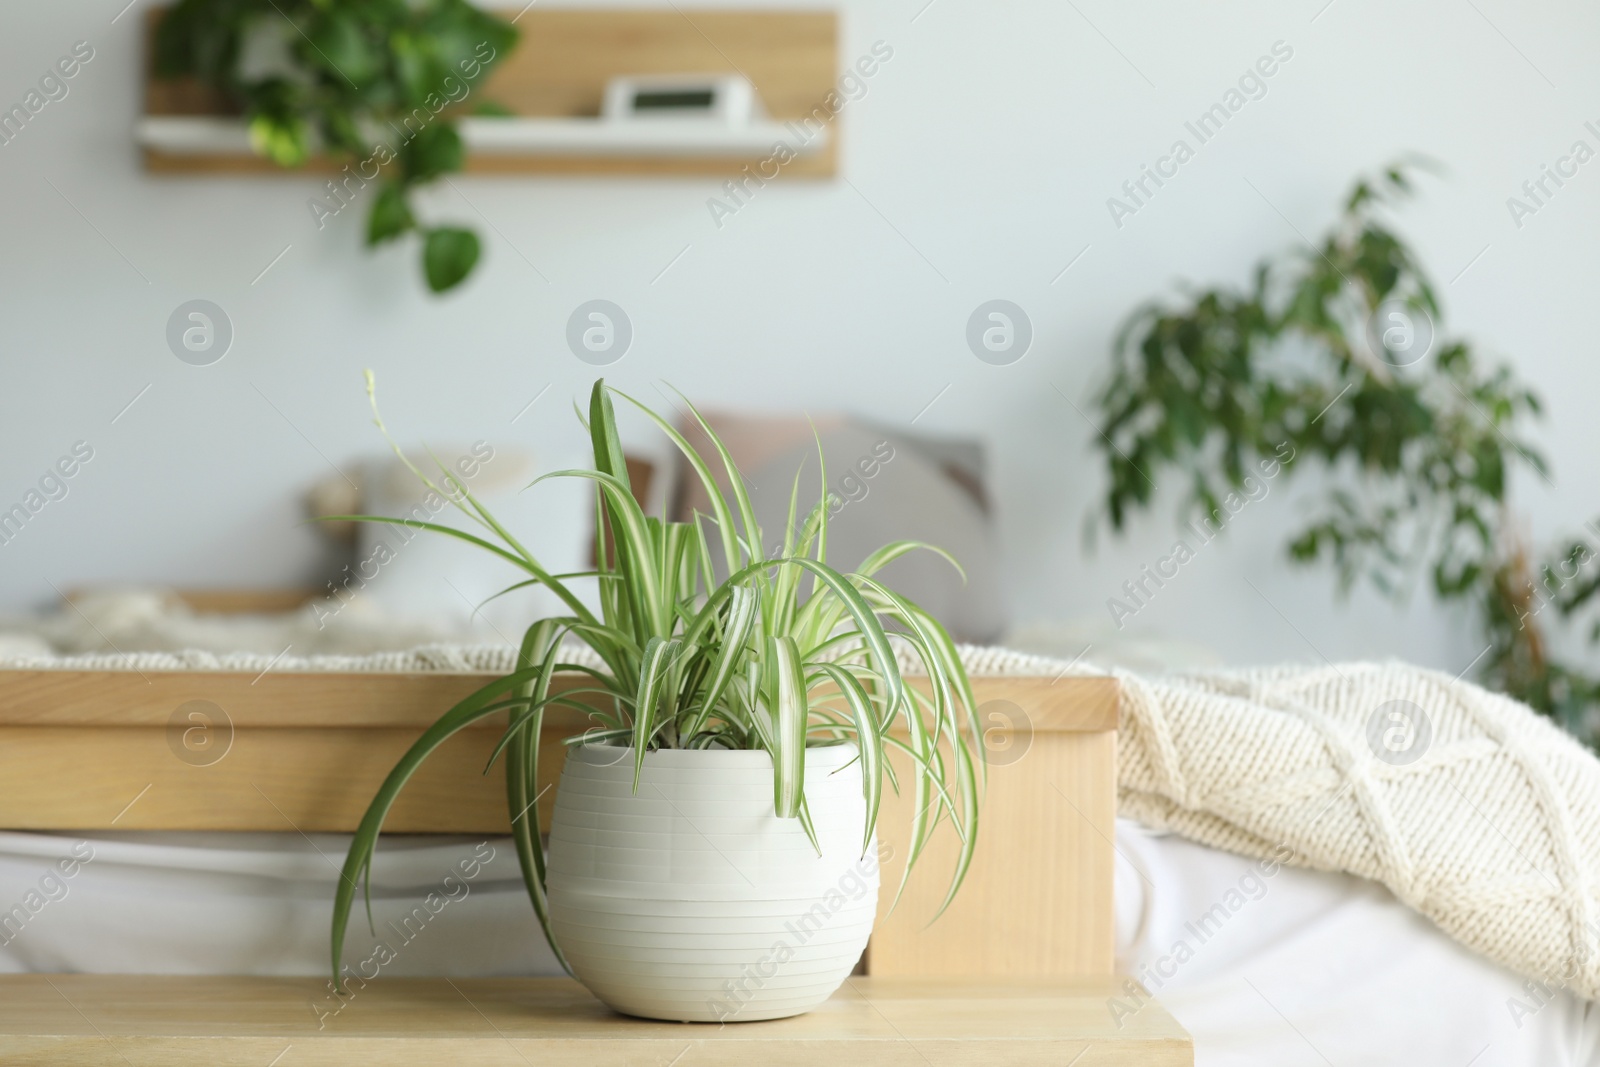 Photo of Cozy bedroom interior with different potted houseplants